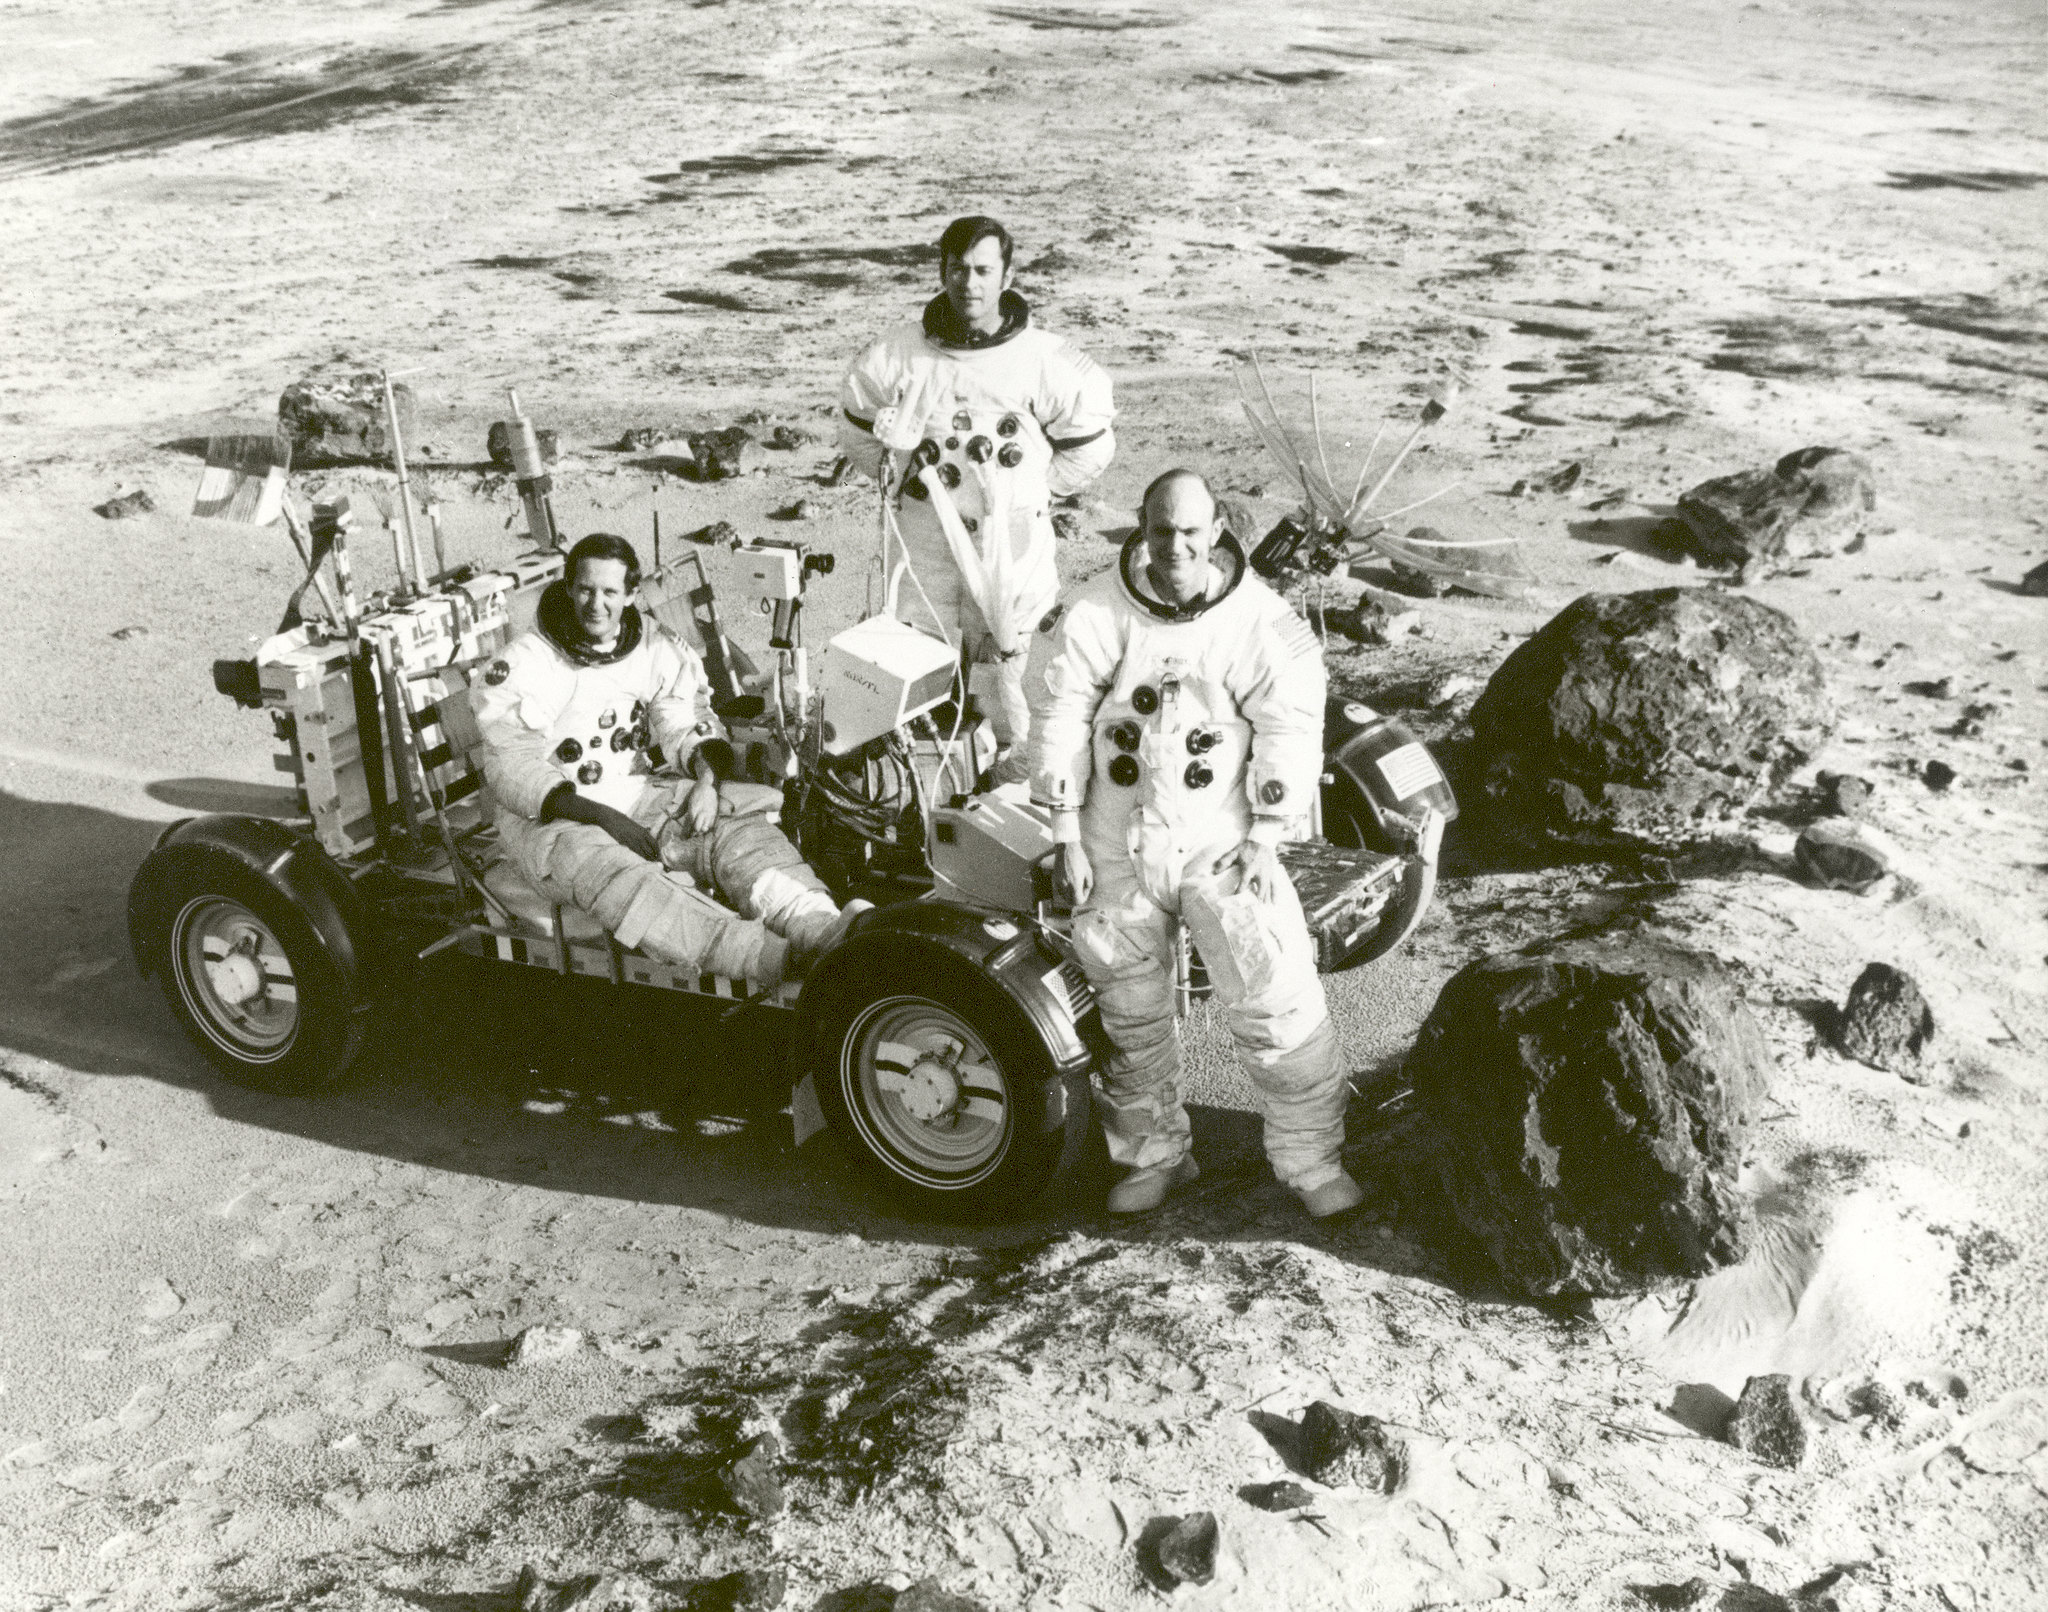 Photo of Apollo 16 astronauts during a training session